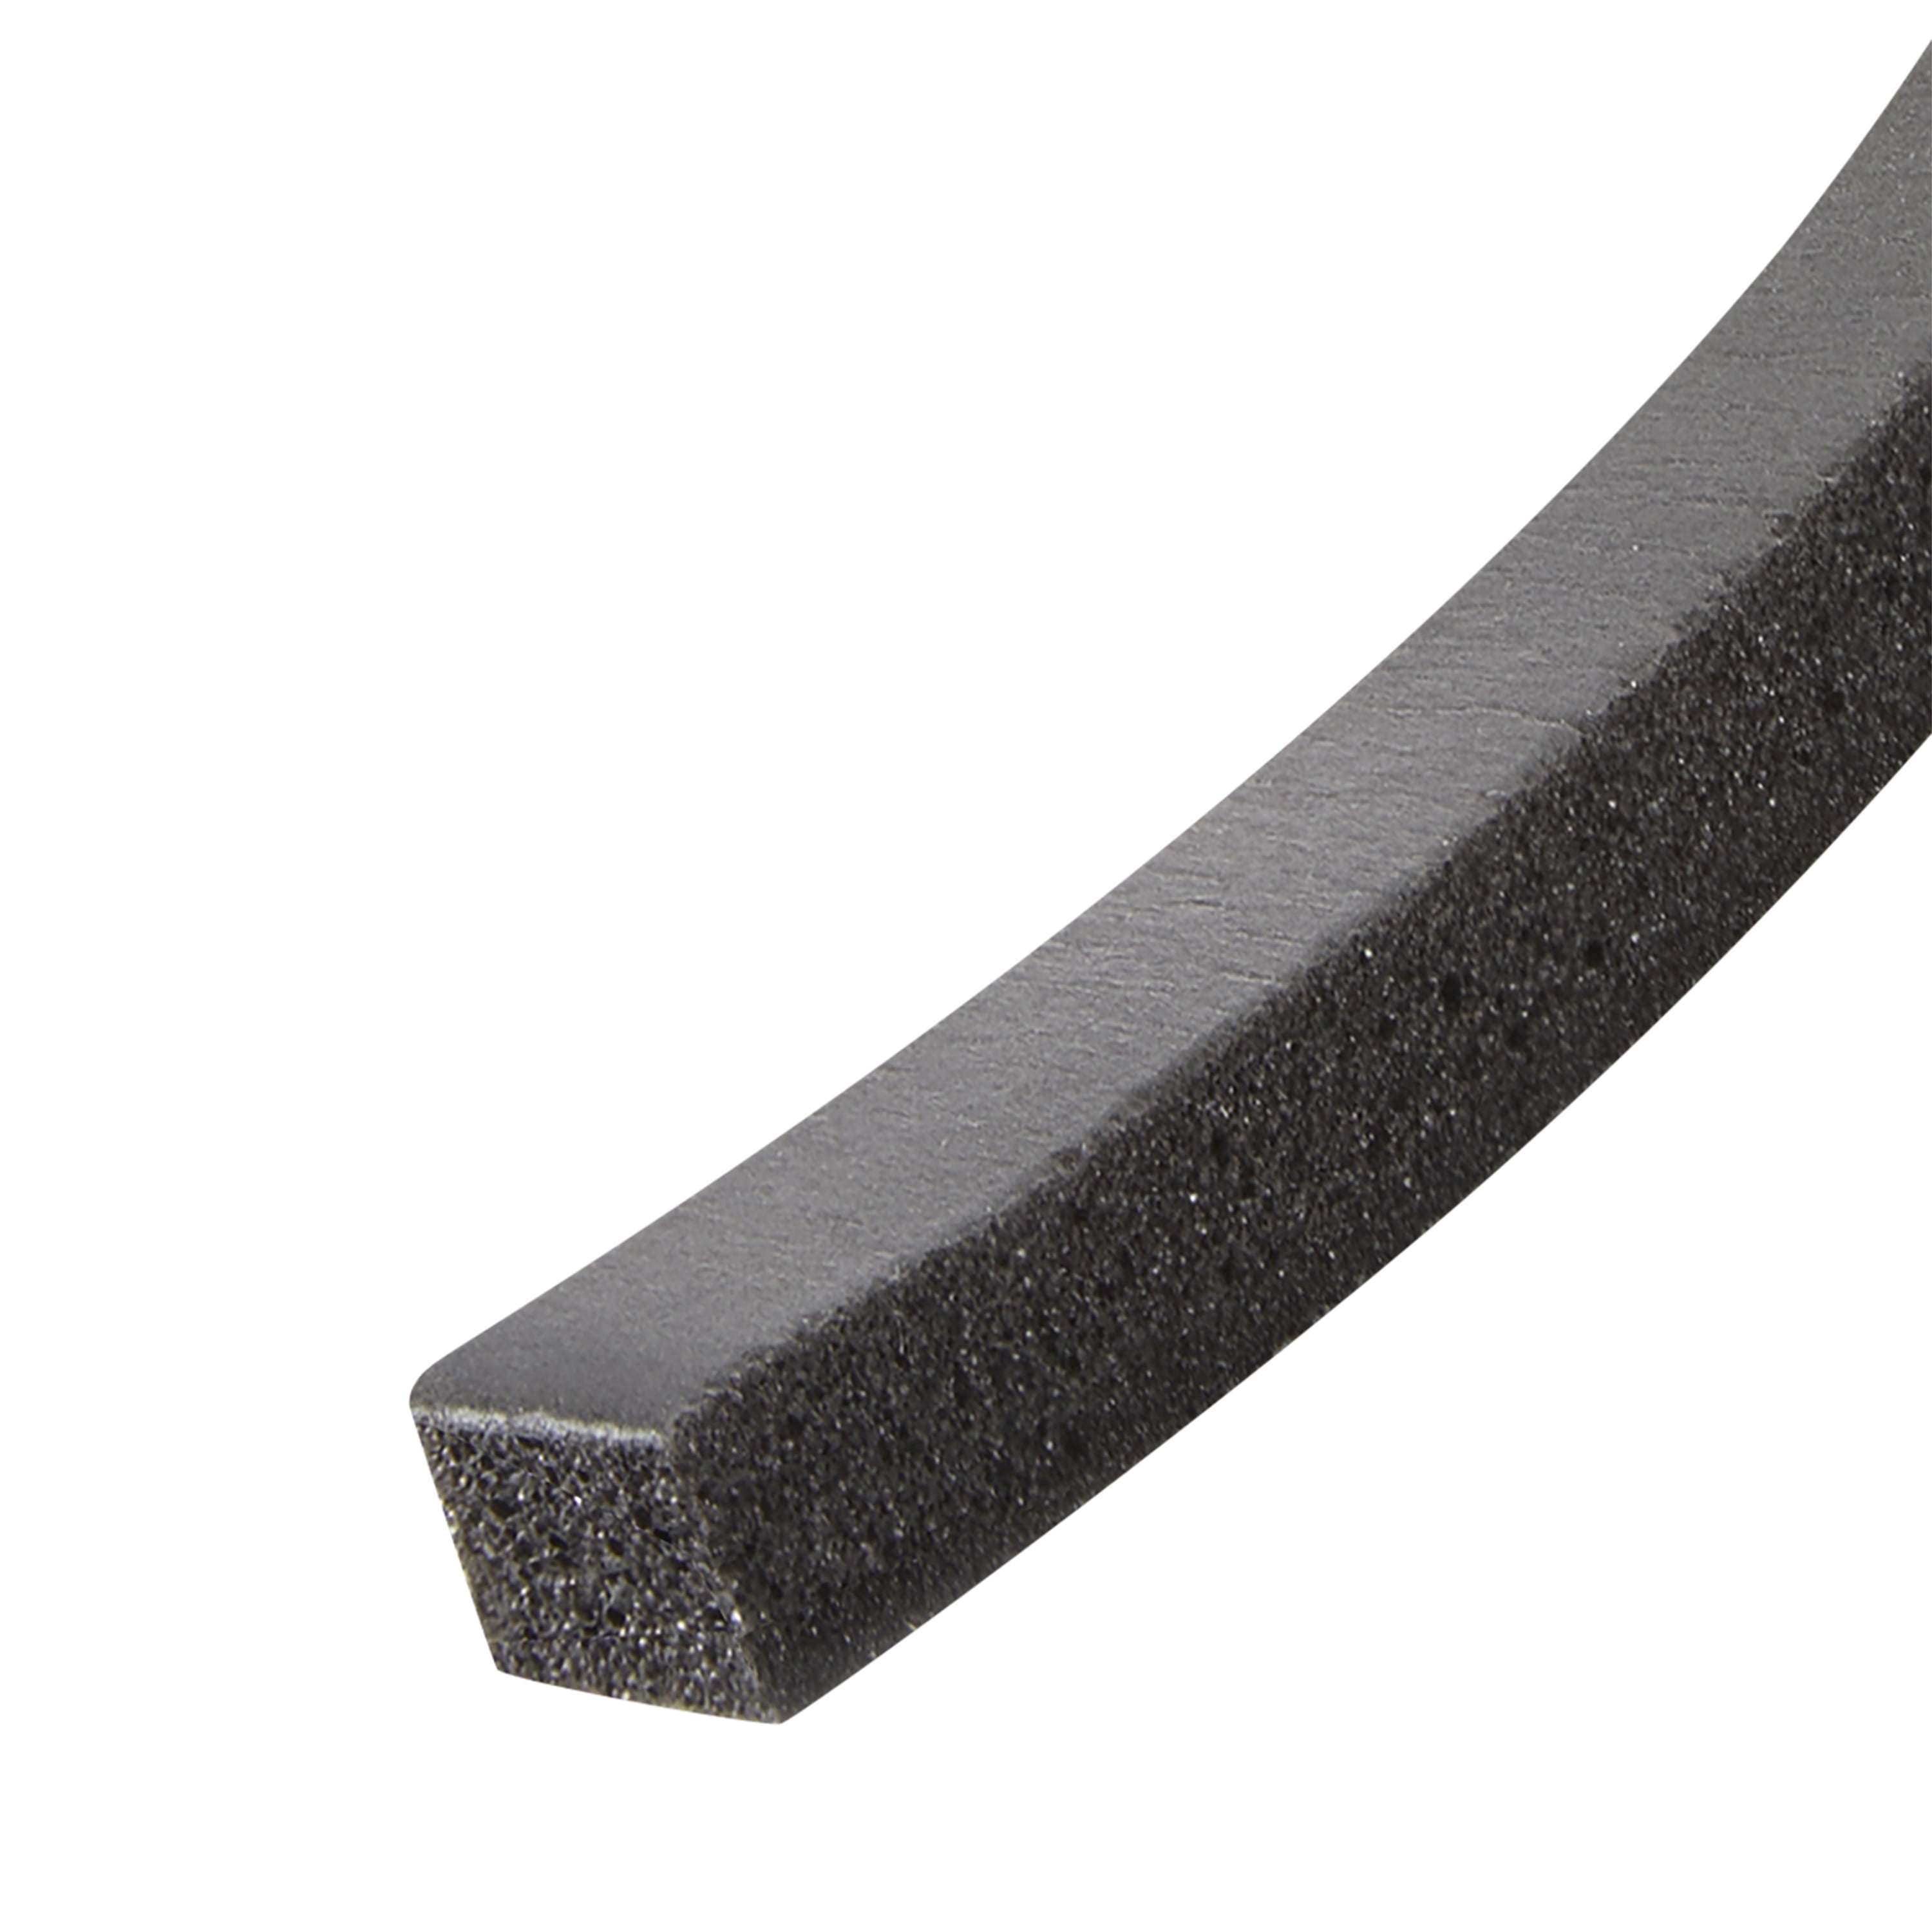 Frost King 3/8 in. X 3/16 in. X 10 ft. Black High-Density Rubber Foam  Weatherstrip Tape R338H - The Home Depot